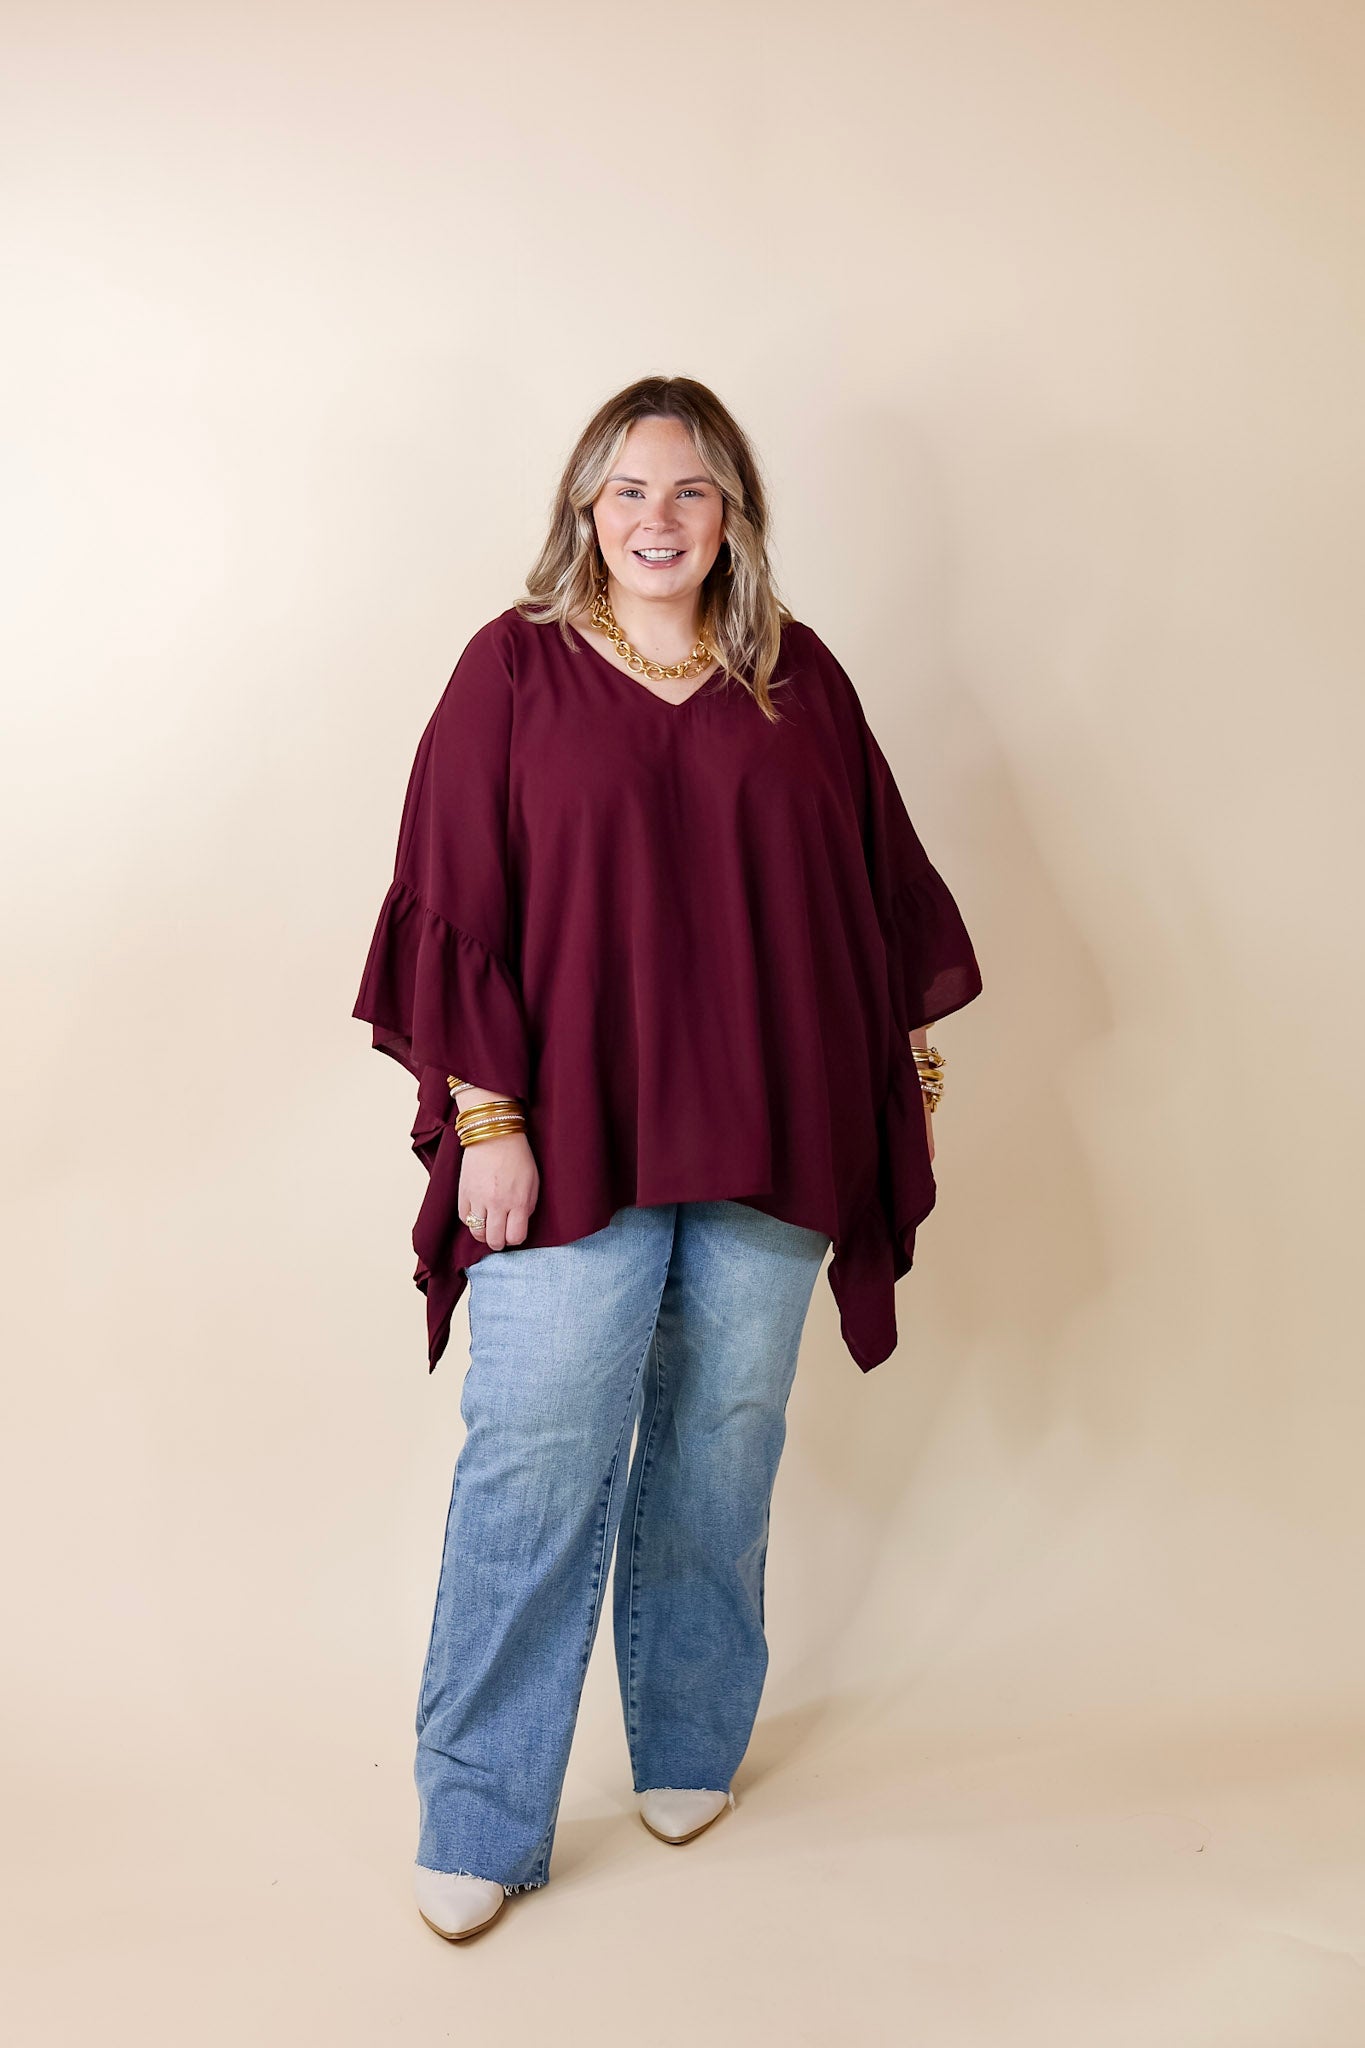 Secret Strength Ruffle Detail Poncho Top in Maroon - Giddy Up Glamour Boutique